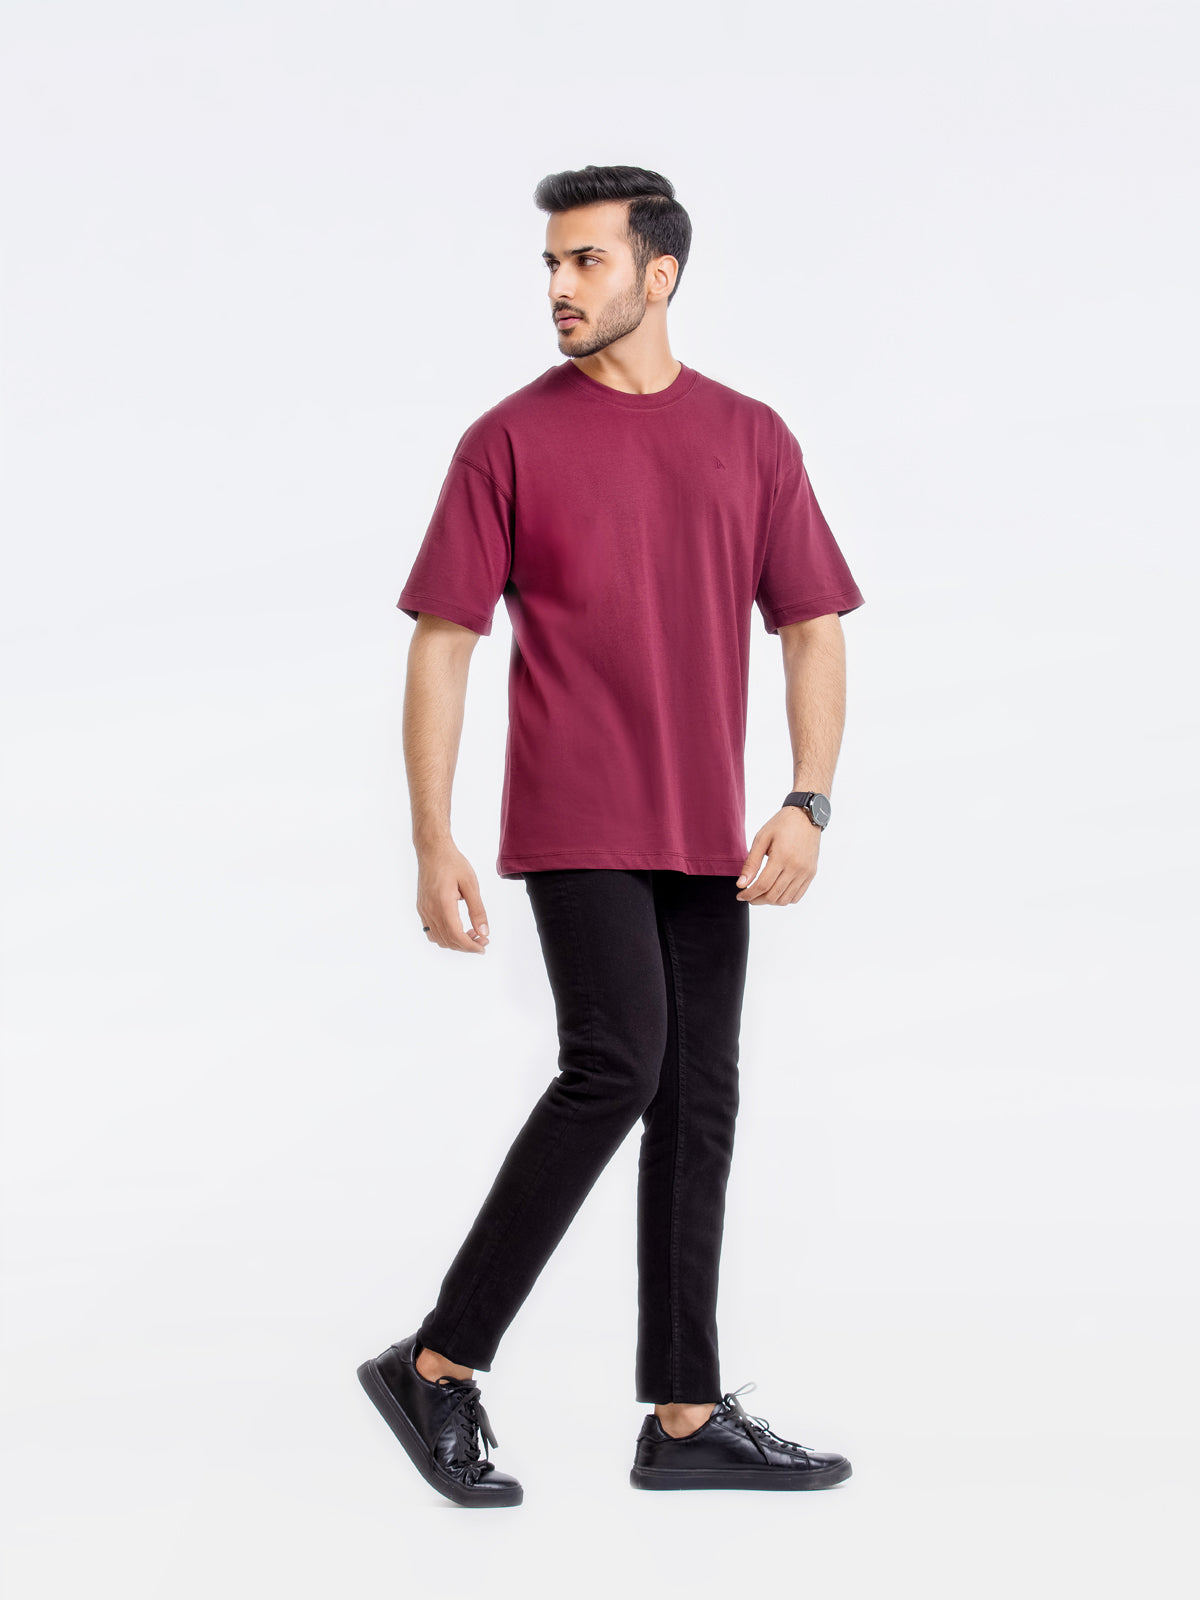 Basic Relax Fit Tee - FMTBL23-005